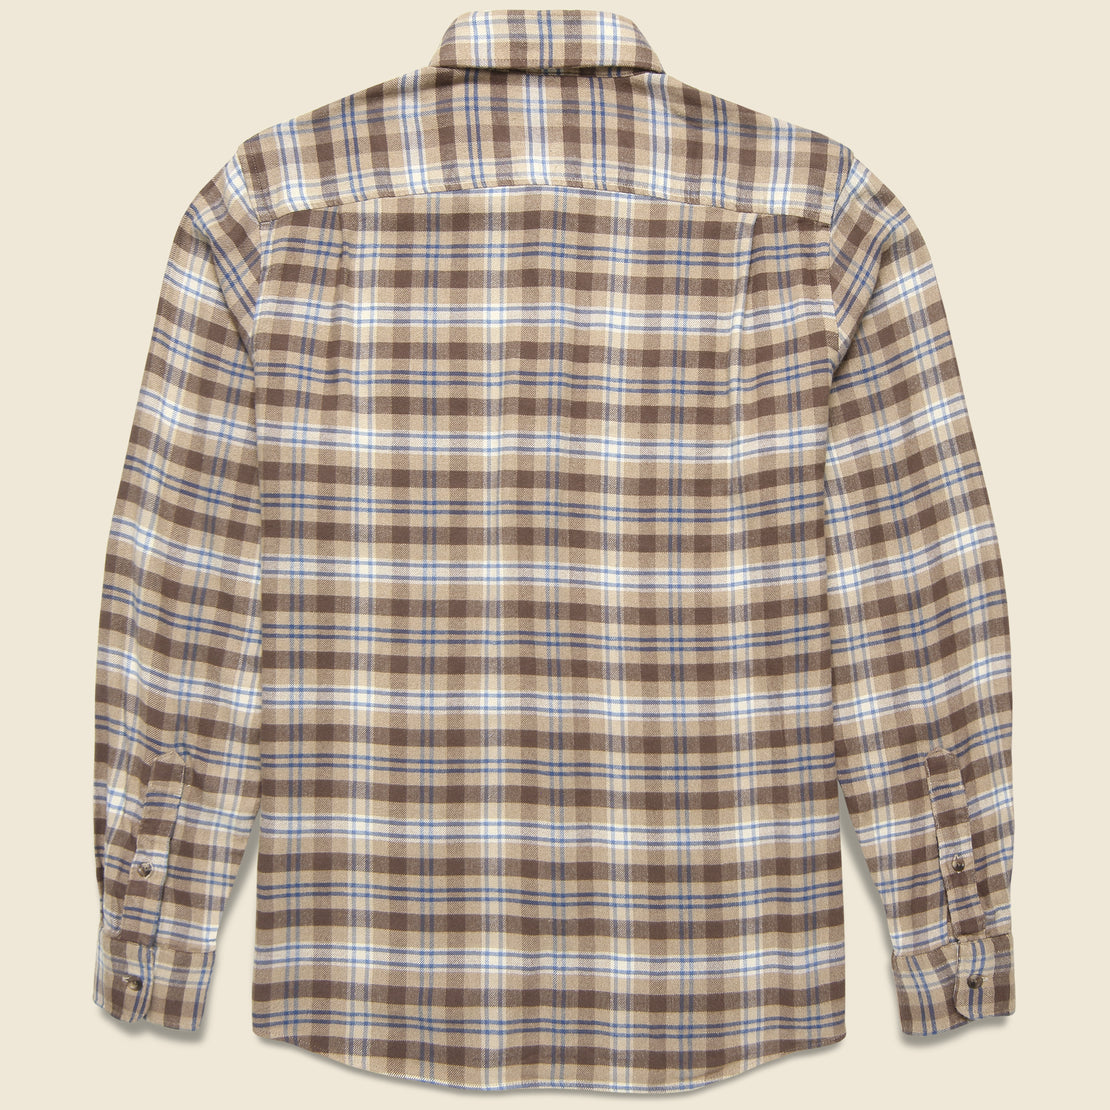 Movement Flannel - Ridgeline Plaid - Faherty - STAG Provisions - Tops - L/S Woven - Plaid